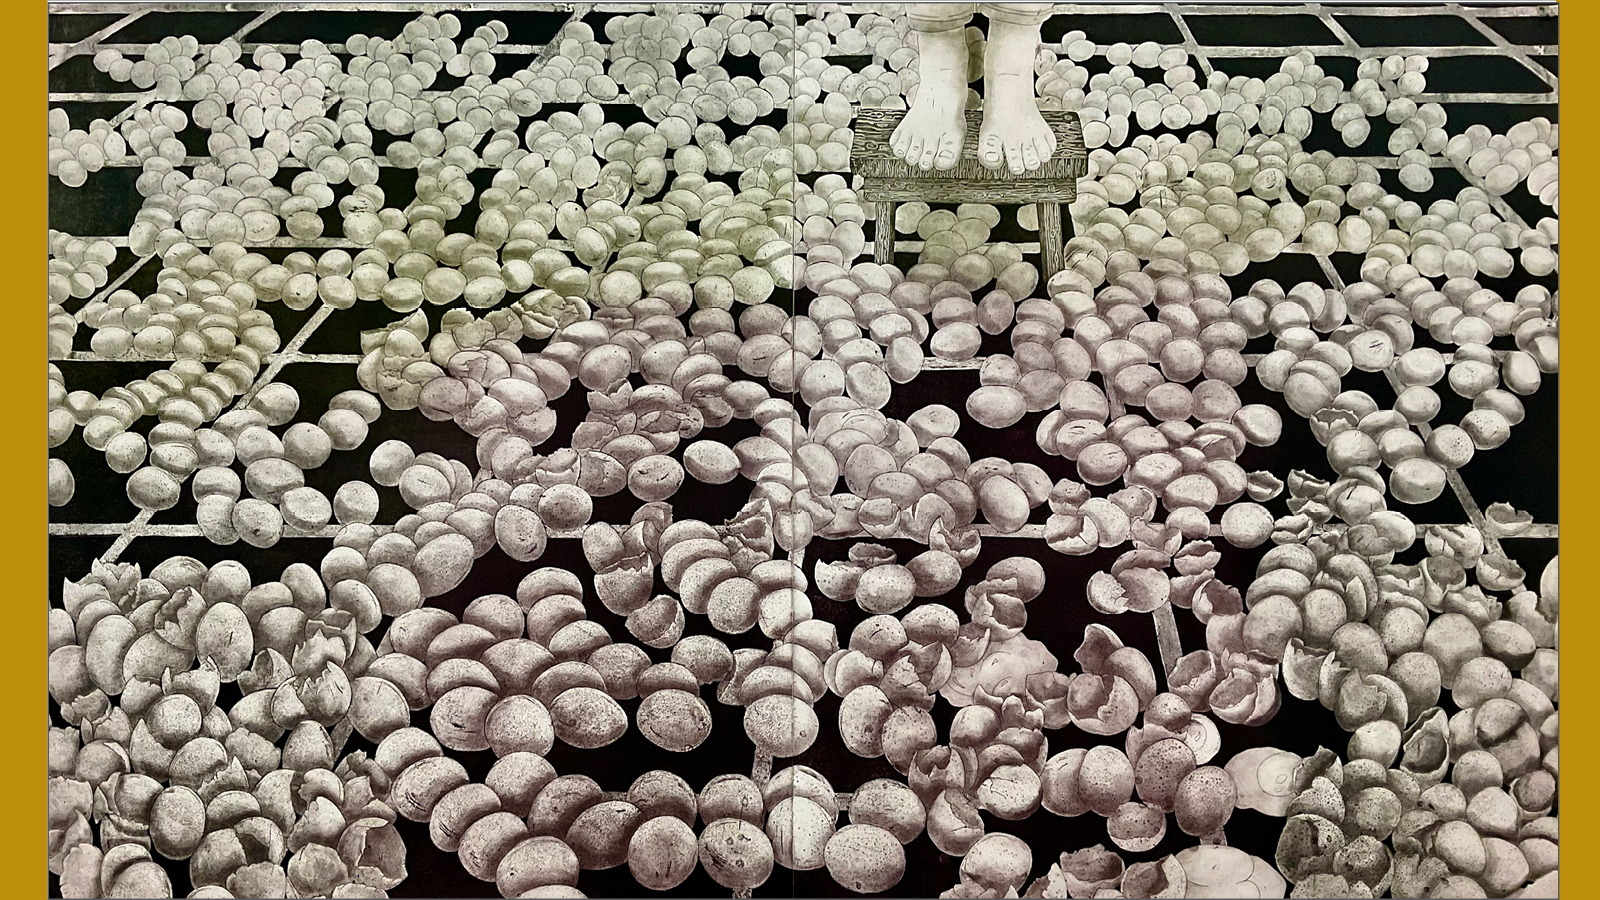 Emily Legleitner, You are full of want and fear. An illustration of several thousand eggs spread across a black tile floor. The feet of a figure can be seen standing on a stool placed in the middle of the eggs. Some eggs have been broken, but most are whole. Colours are muted, shades of dark reg-greys and yellow-greys make up the eggs, in stark contrast to jet black tile flooring.